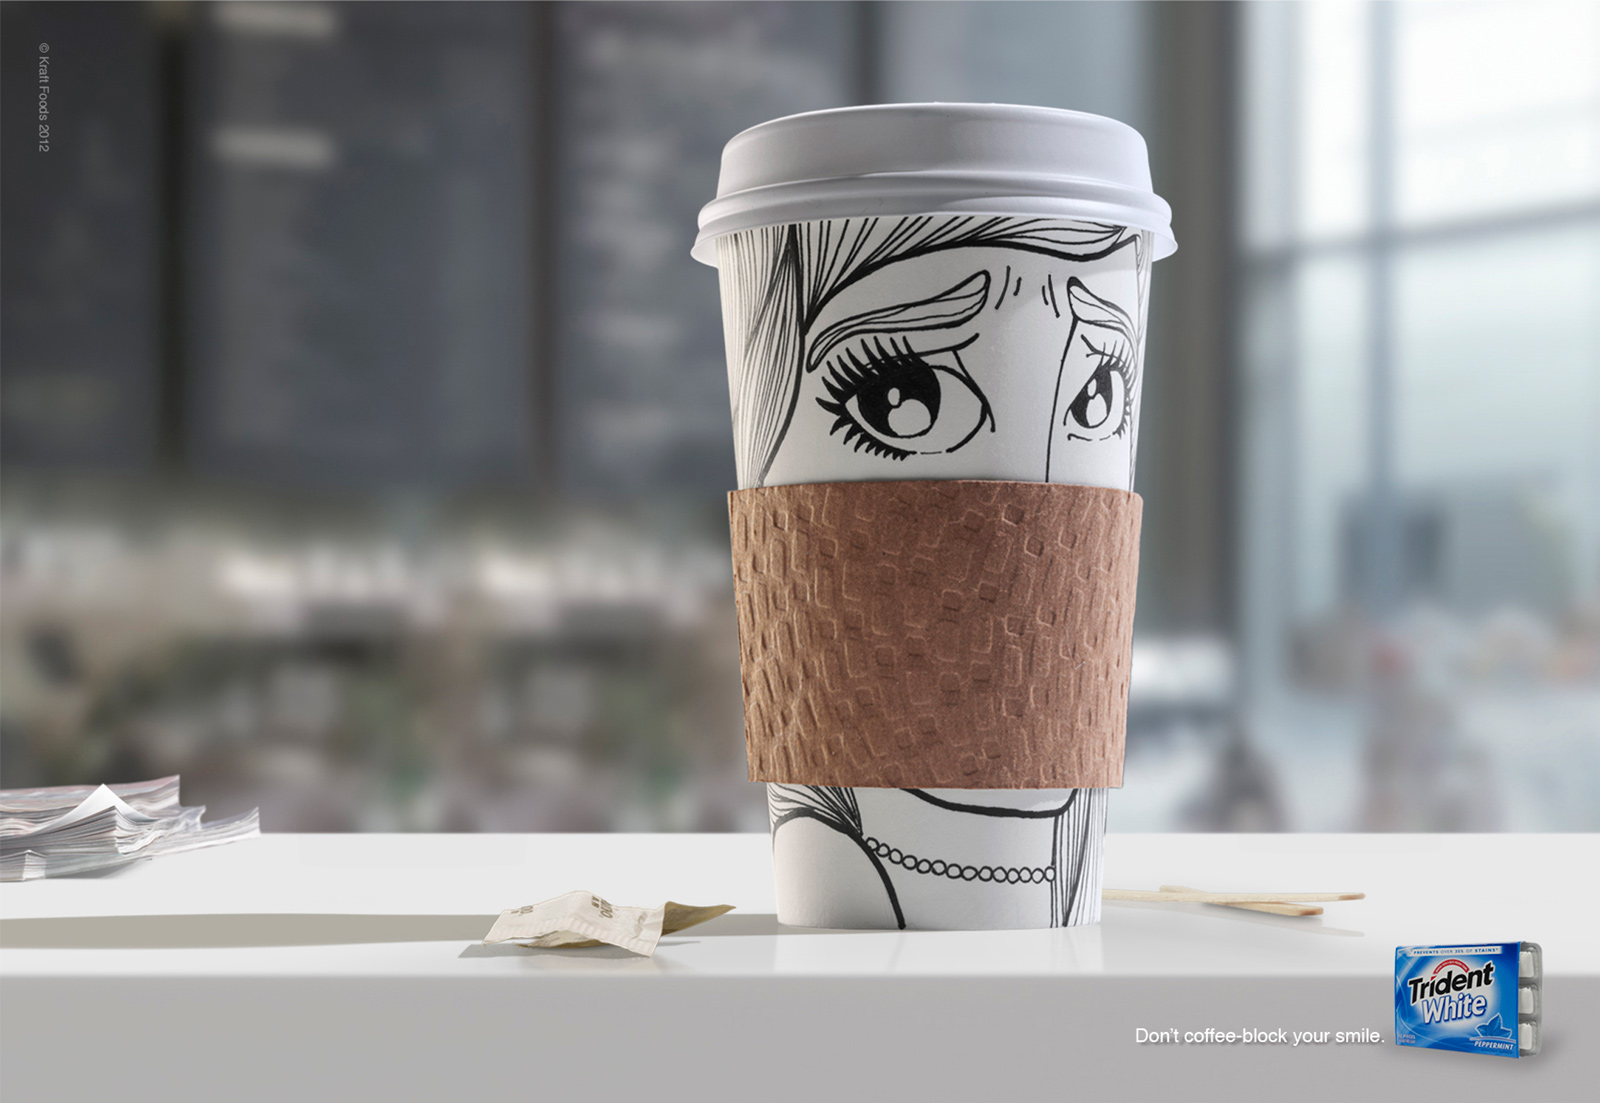 Trident White: Coffee block Campaigns of the World®